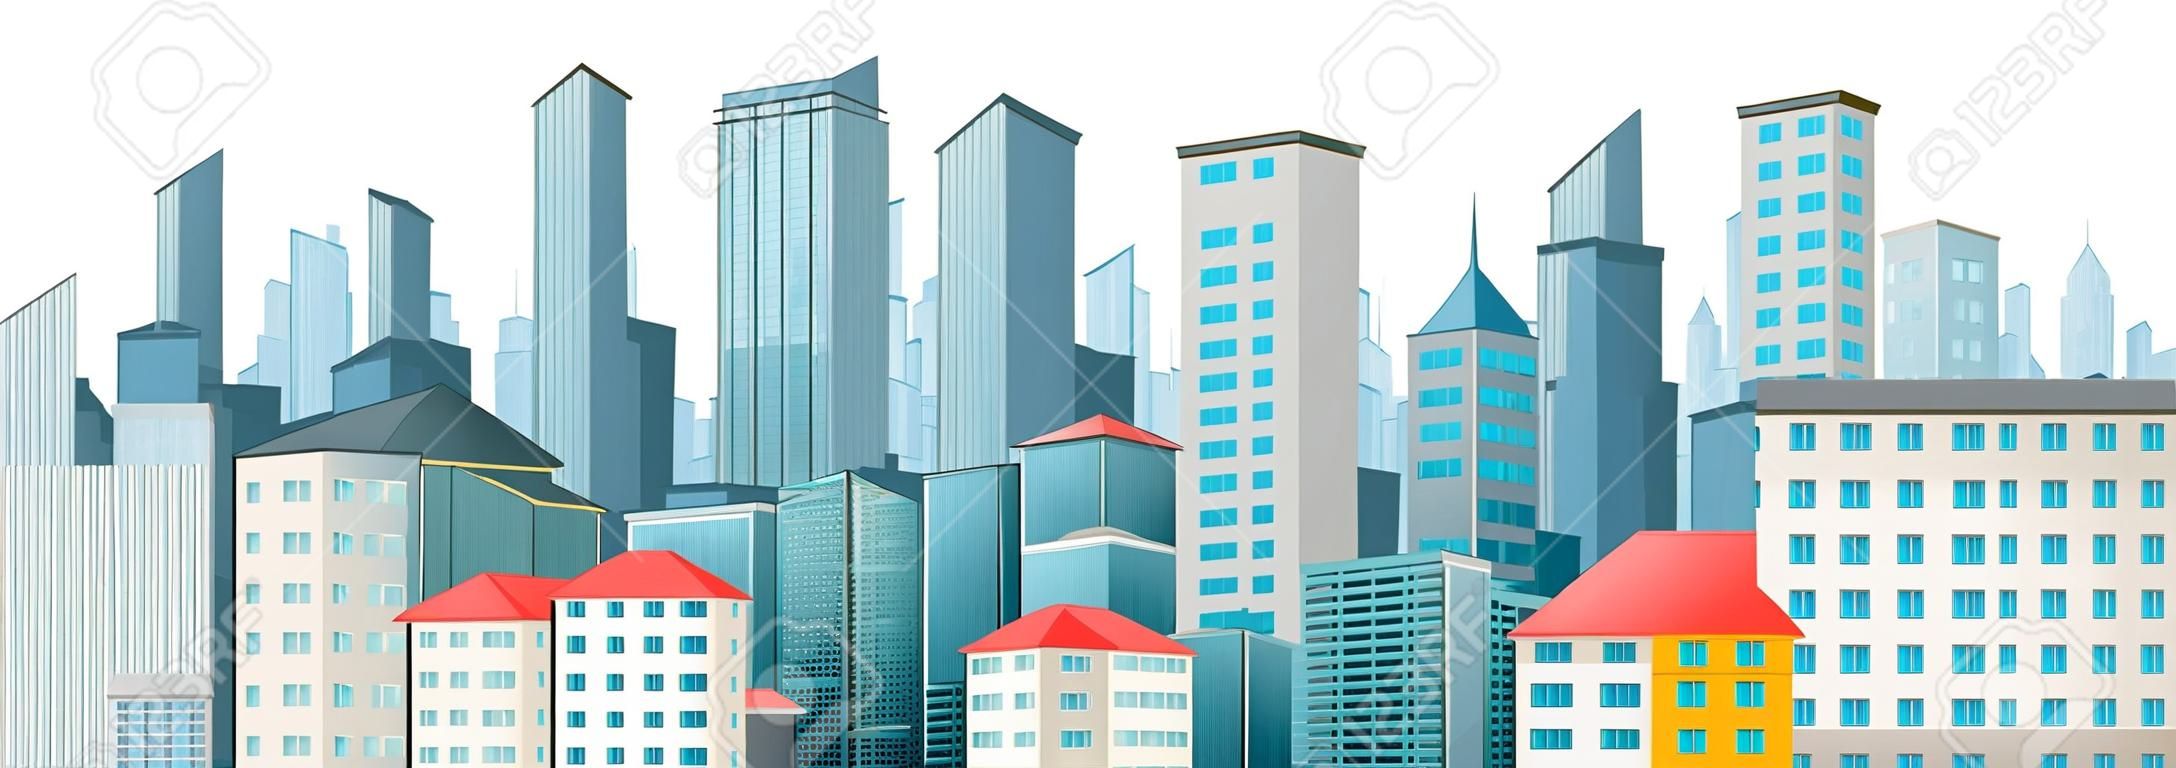 City scene with tall buildings illustration